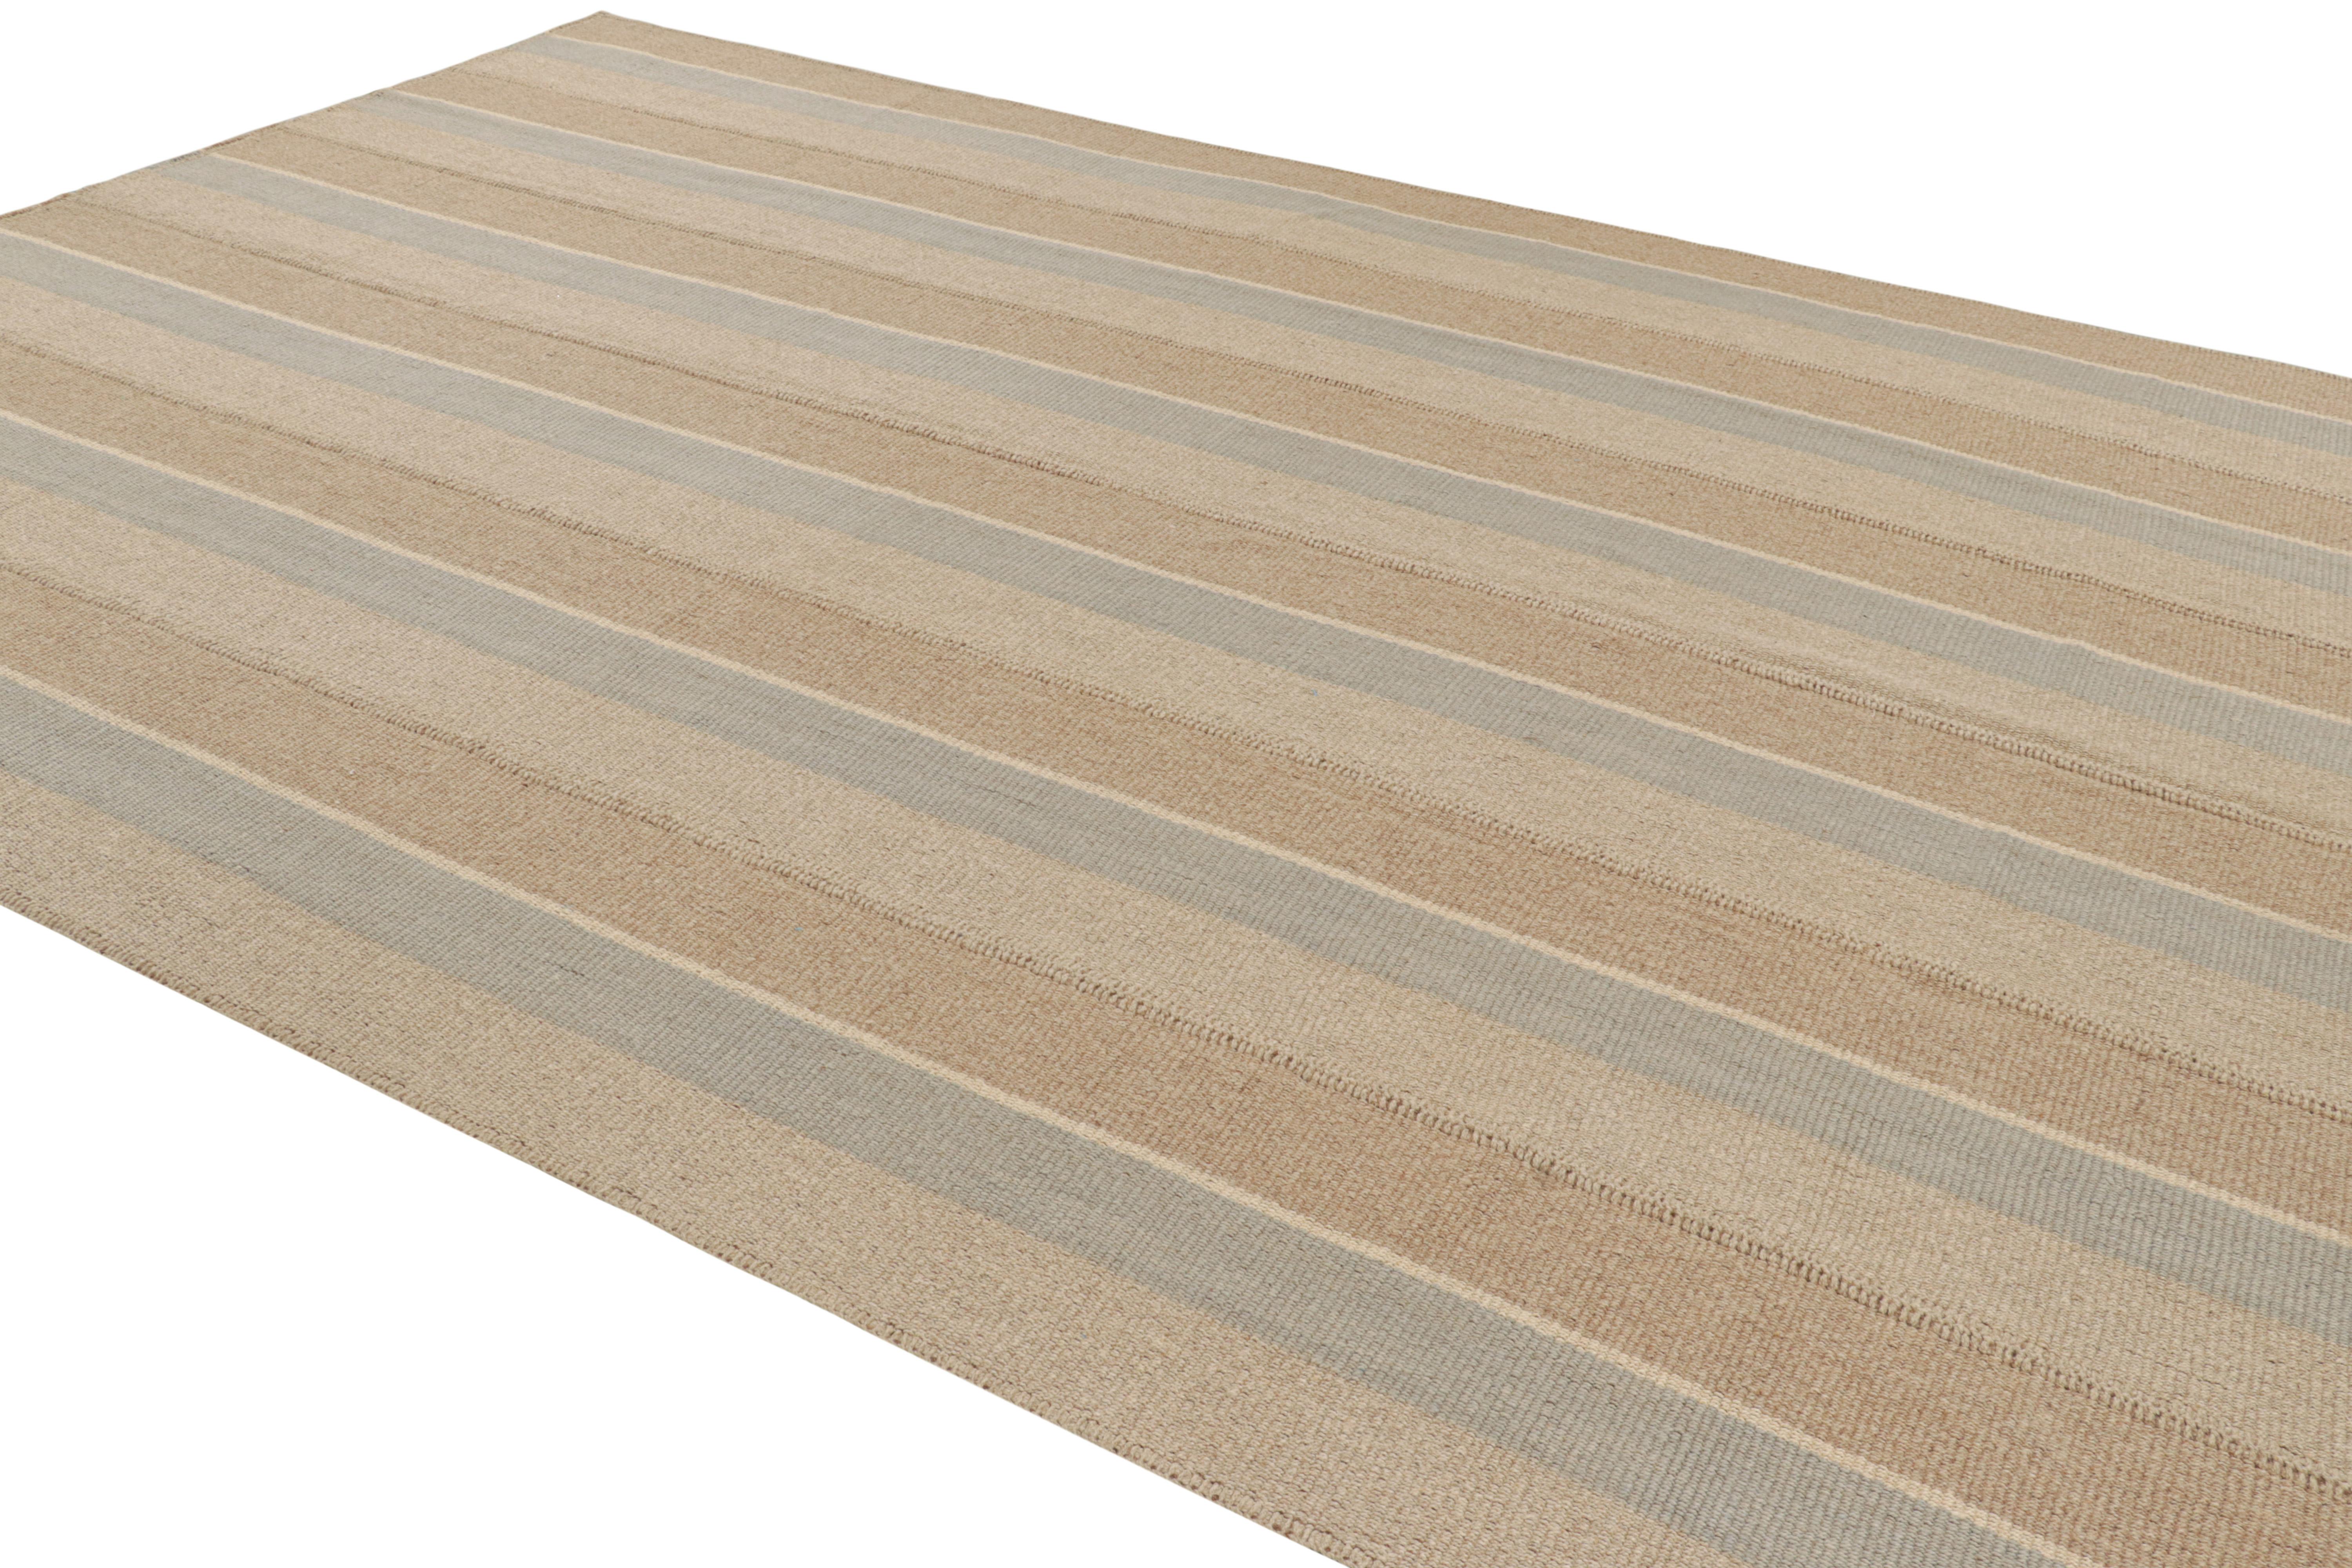 Afghan Rug & Kilim’s Contemporary Kilim in Gray and Beige-Brown Textural Stripes  For Sale